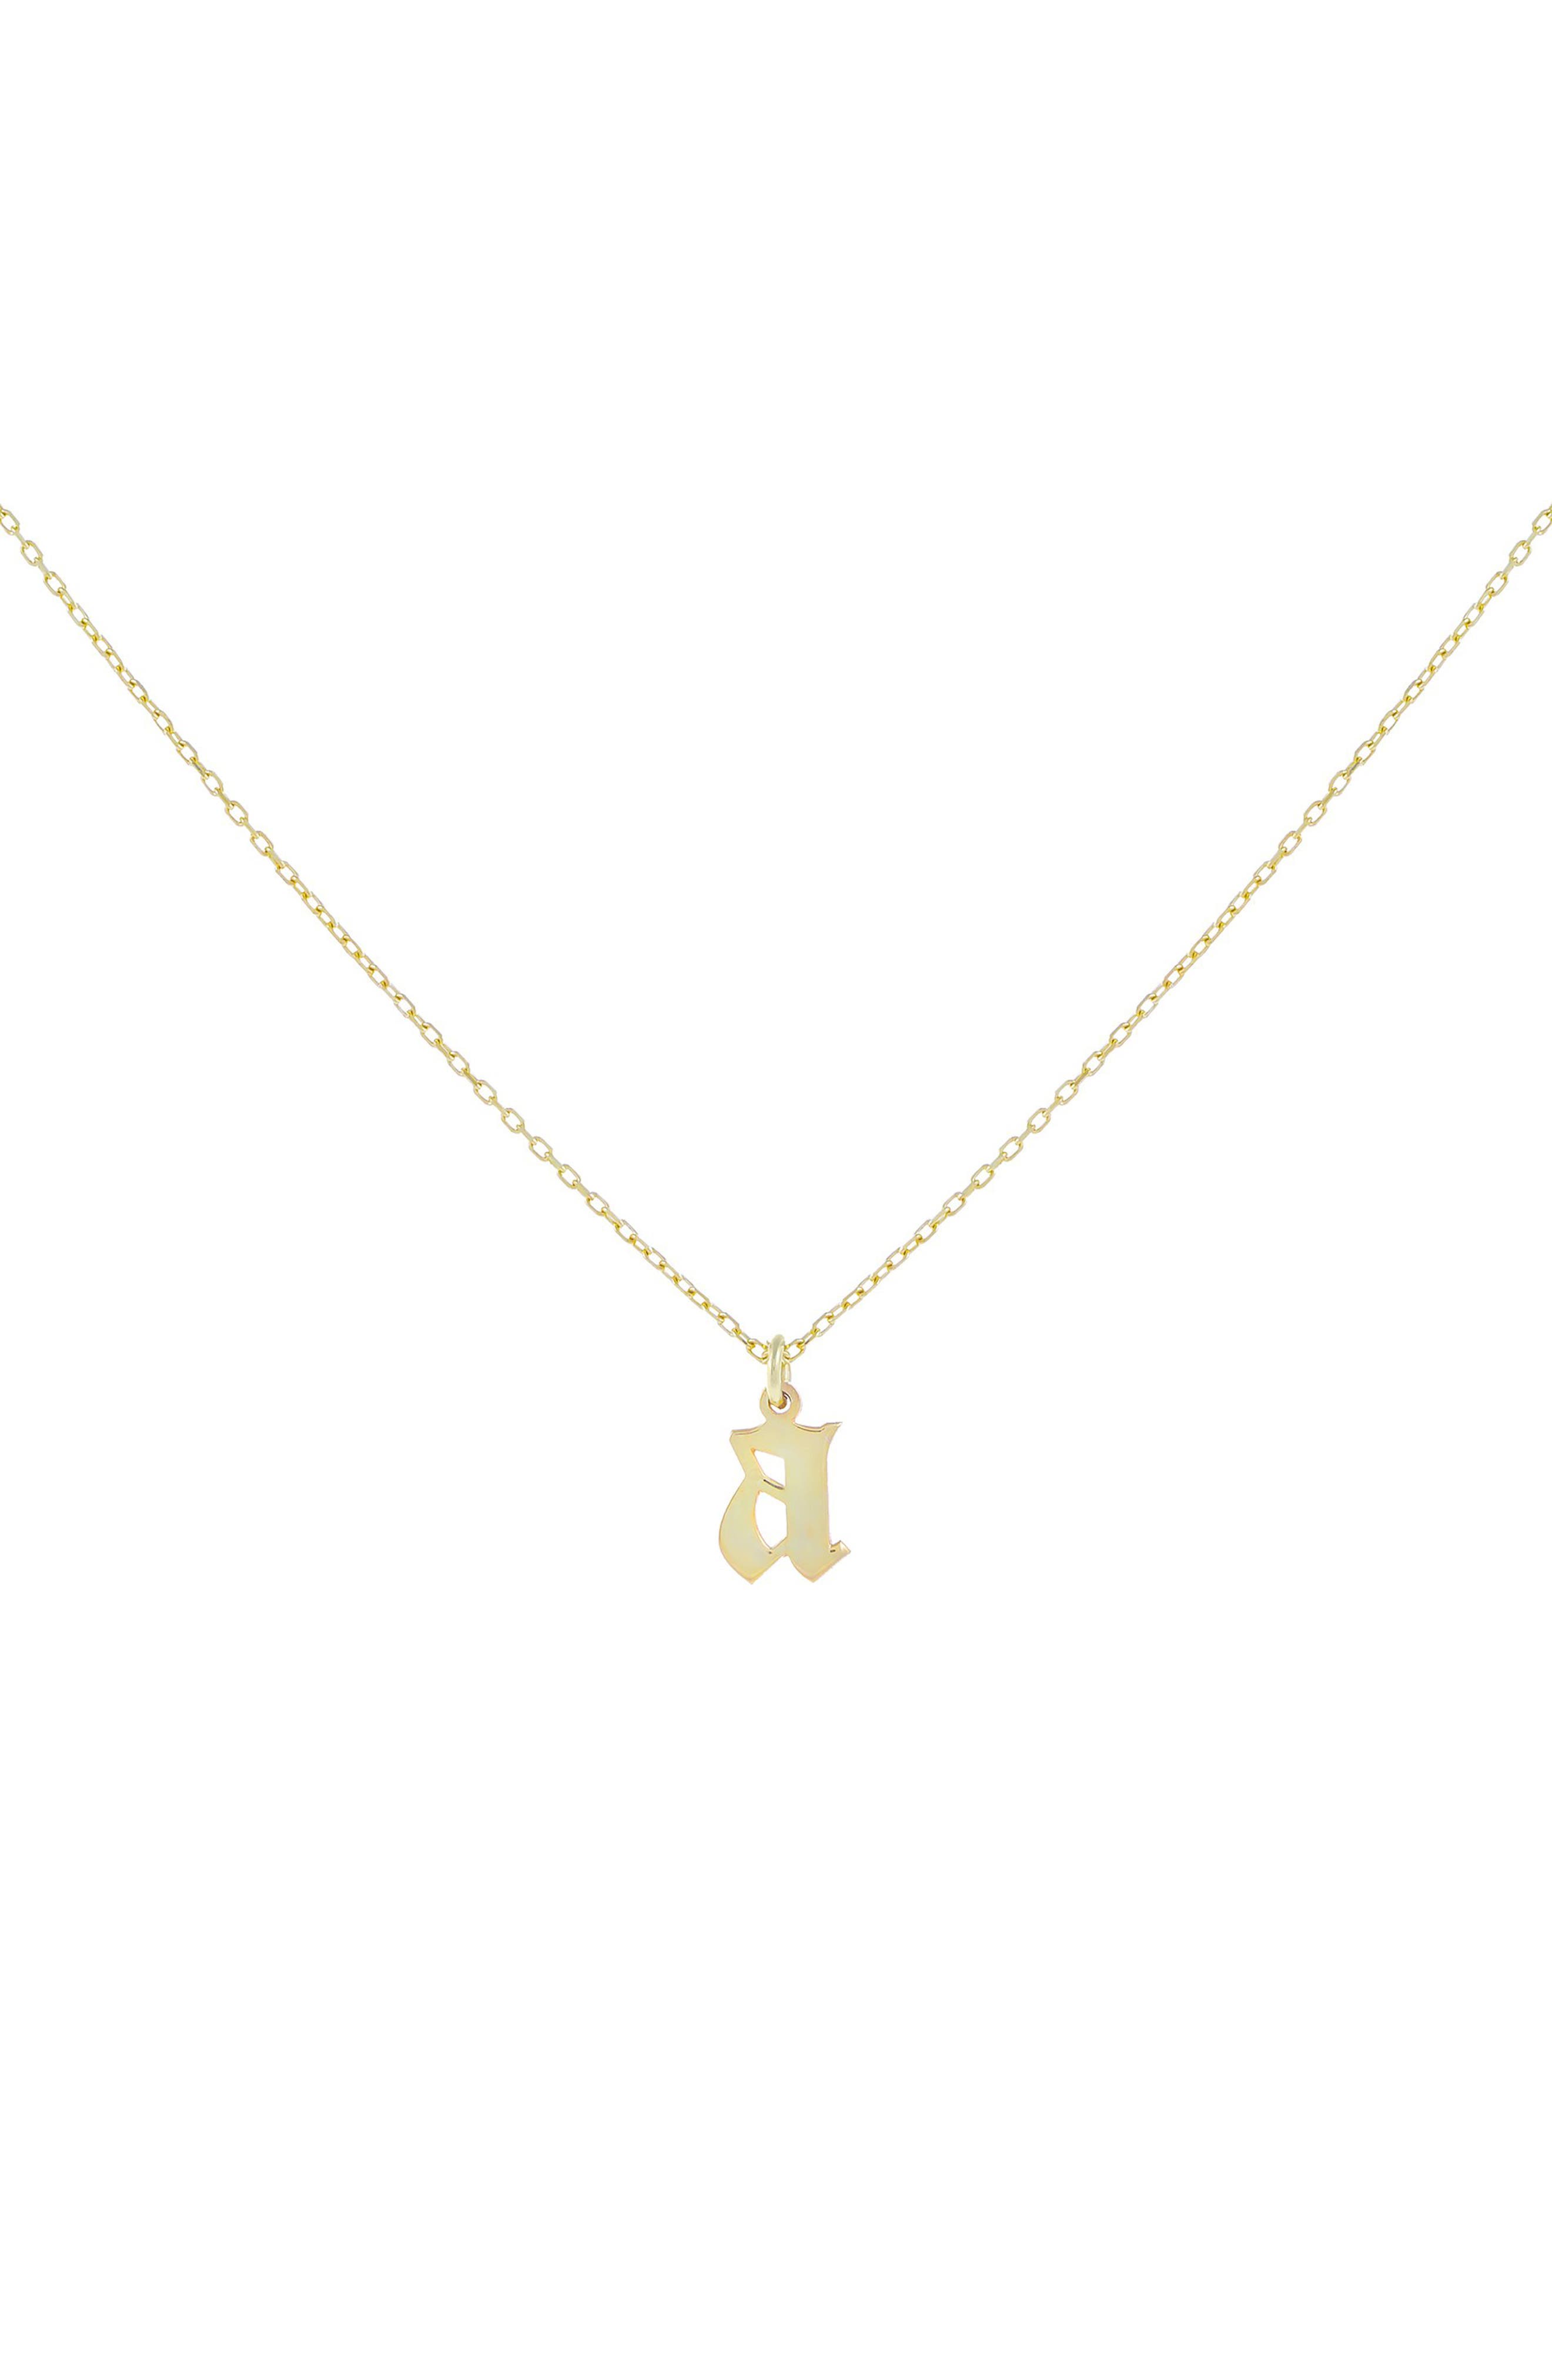 Details about   9ct Gold Gothic Style Initial L Necklace 